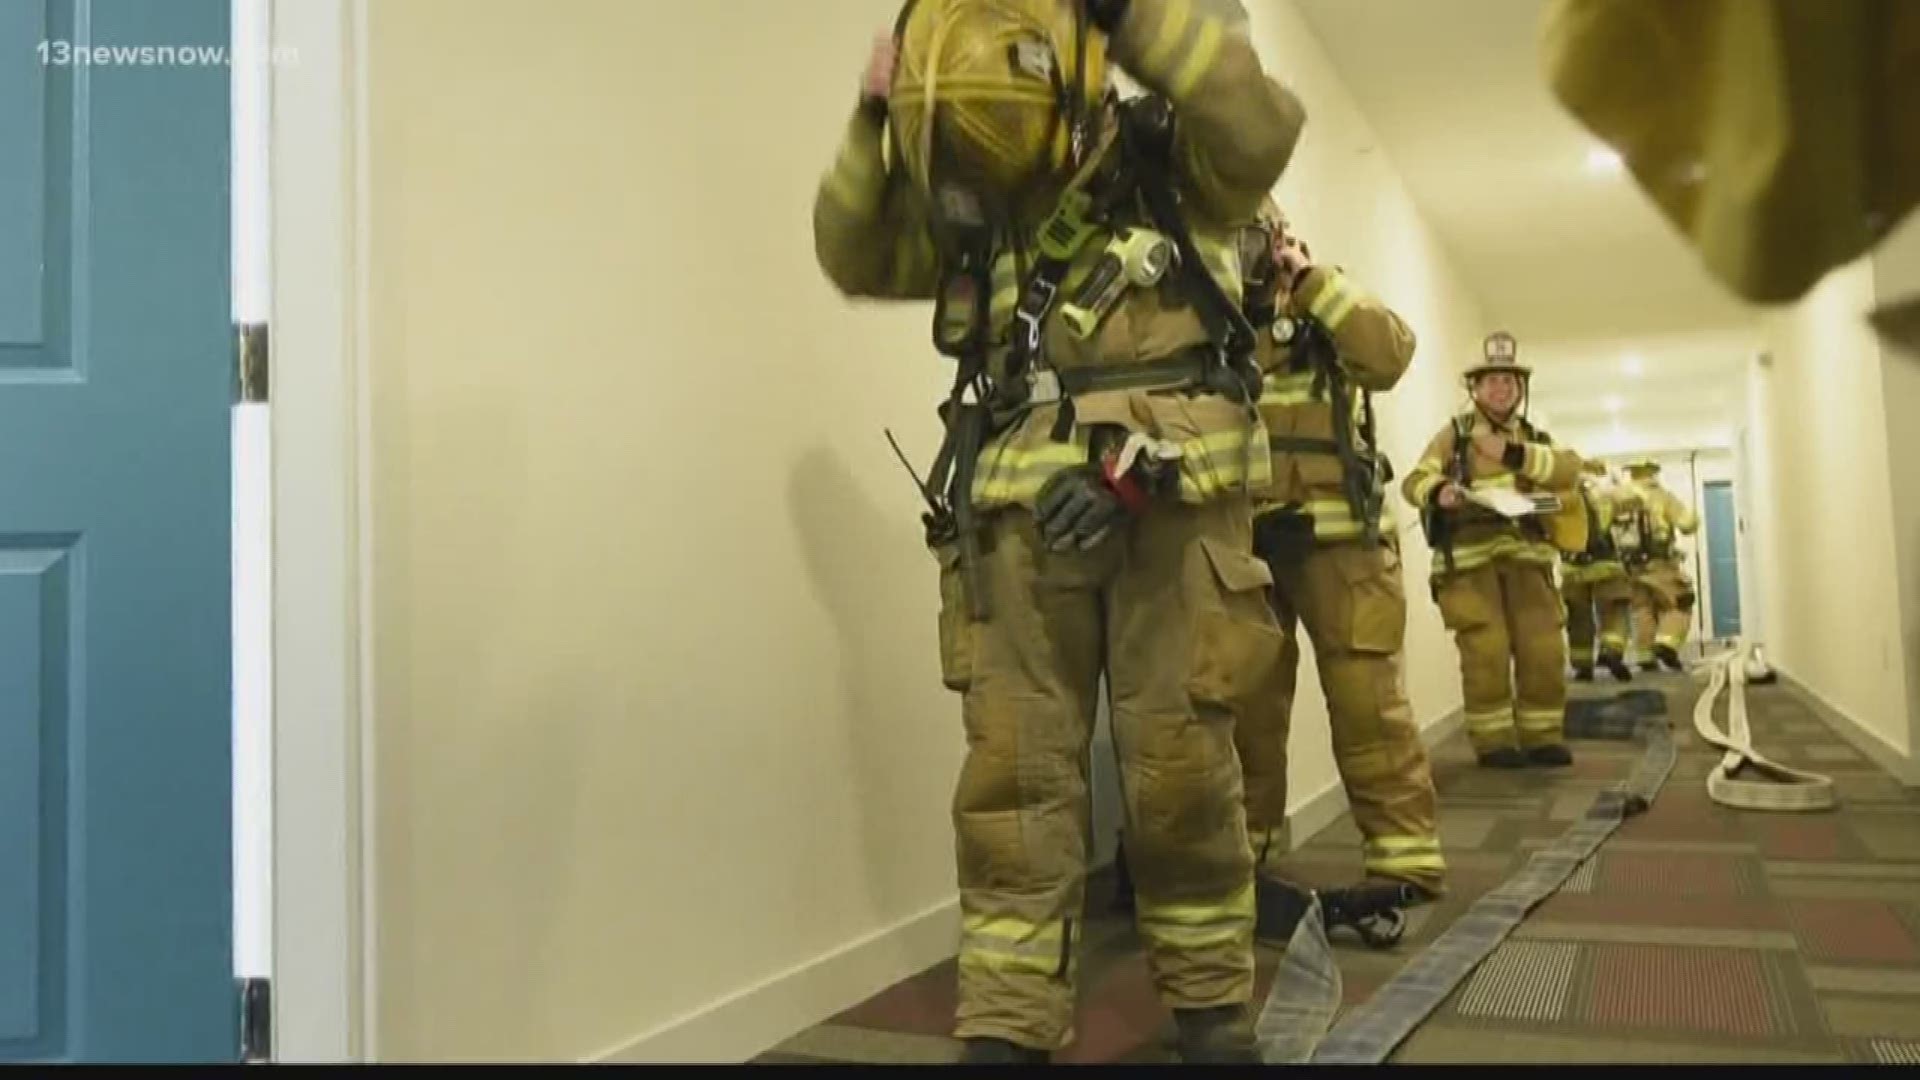 Fire crews from Virginia Beach and Norfolk joined forces to train for terrifying scenarios like these.